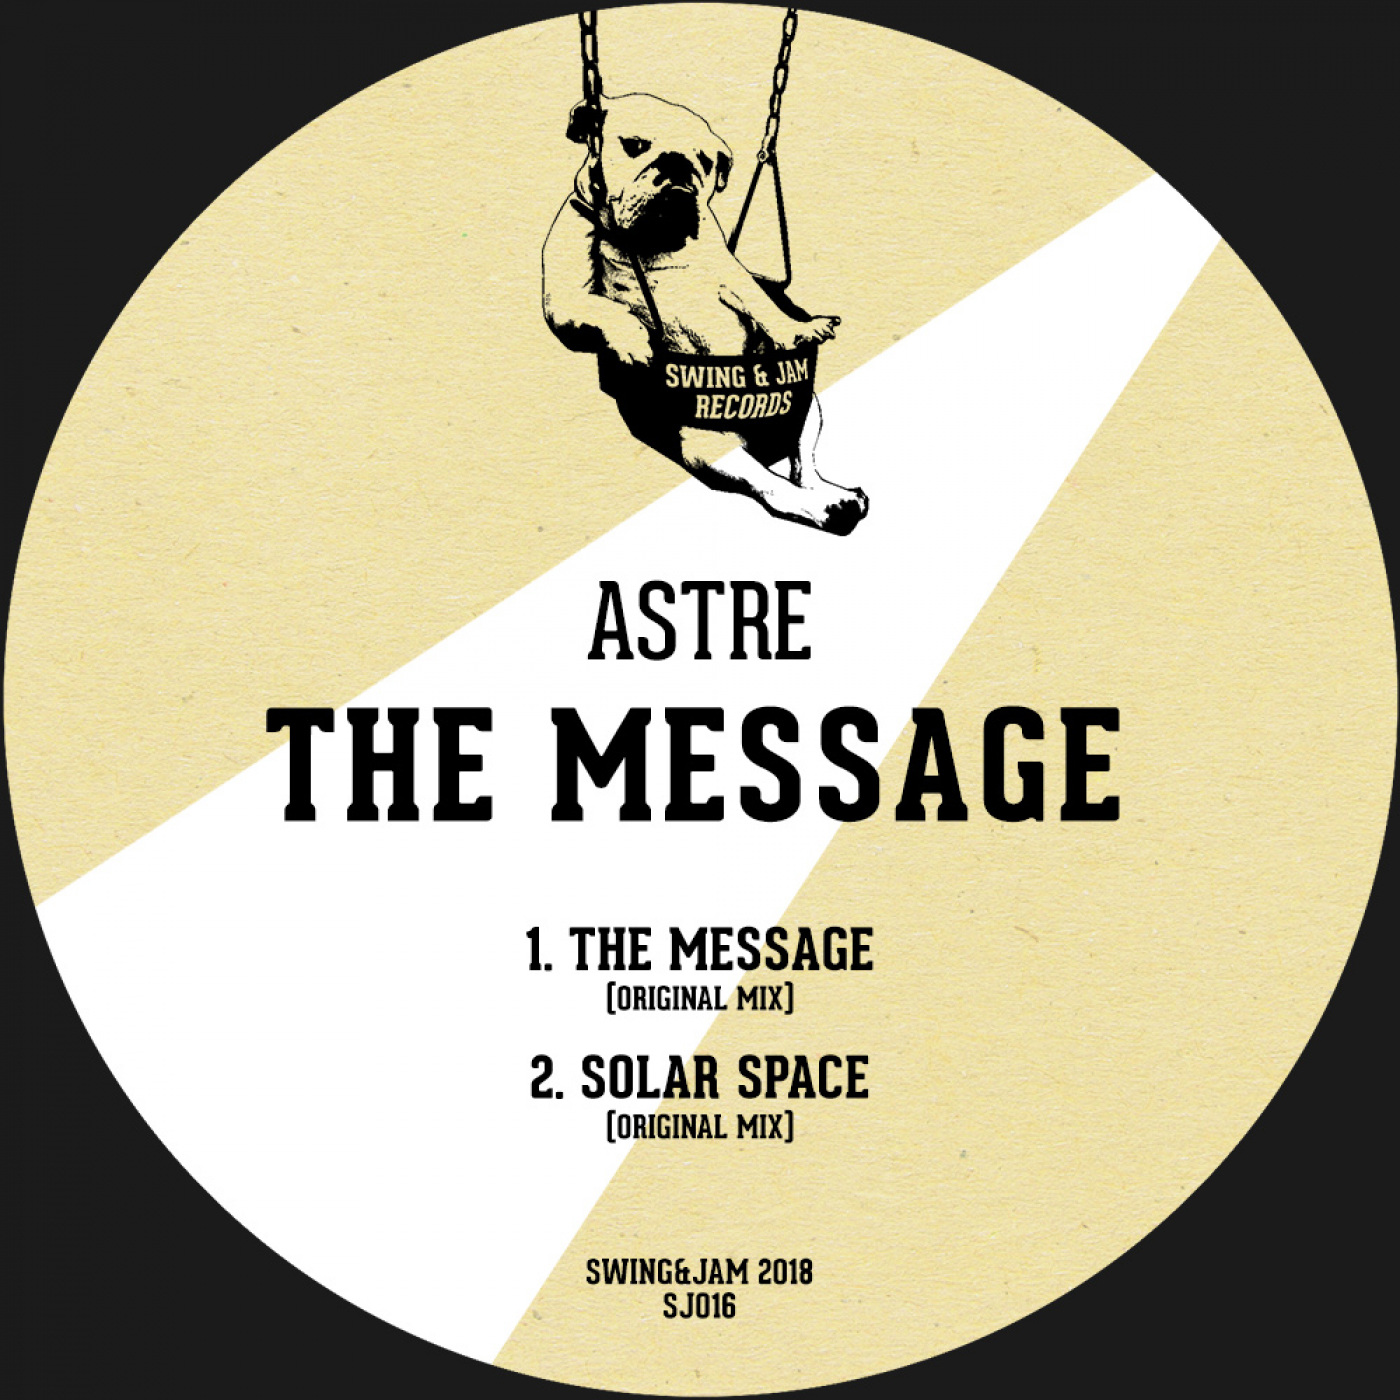 Astre - The Message / Swing & Jam Records